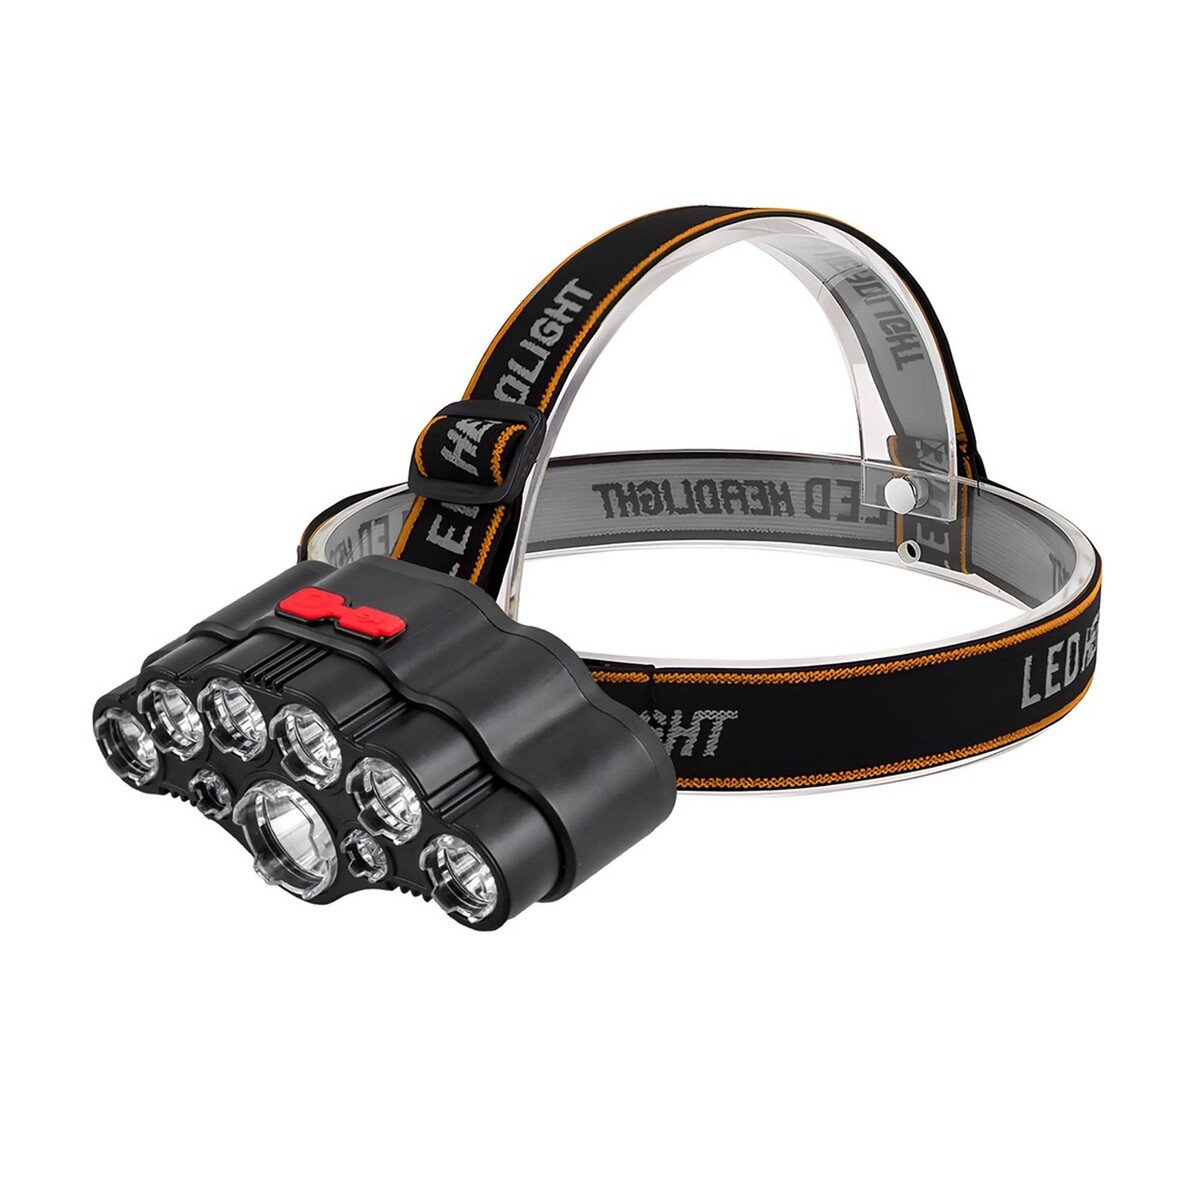 AMT LED Head Lamp With USB Charger / Waterproof Multifunction SH T09